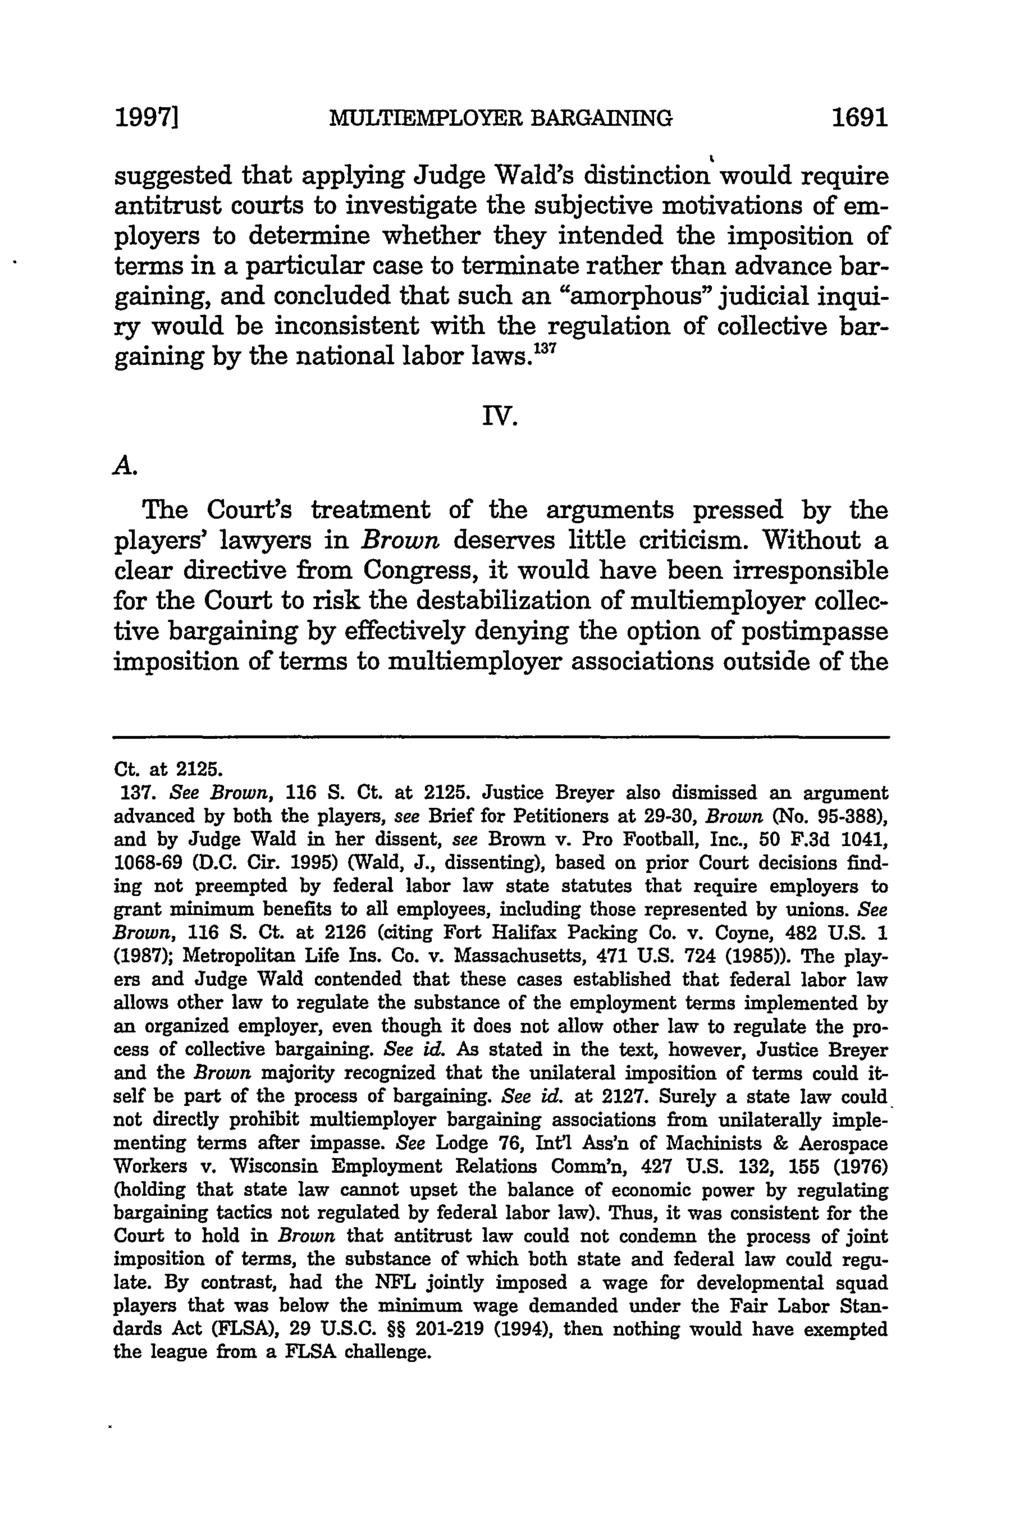 19971 MULTIEMPLOYER BARGAINING 1691 suggested that applying Judge Wald's distinction would require antitrust courts to investigate the subjective motivations of employers to determine whether they